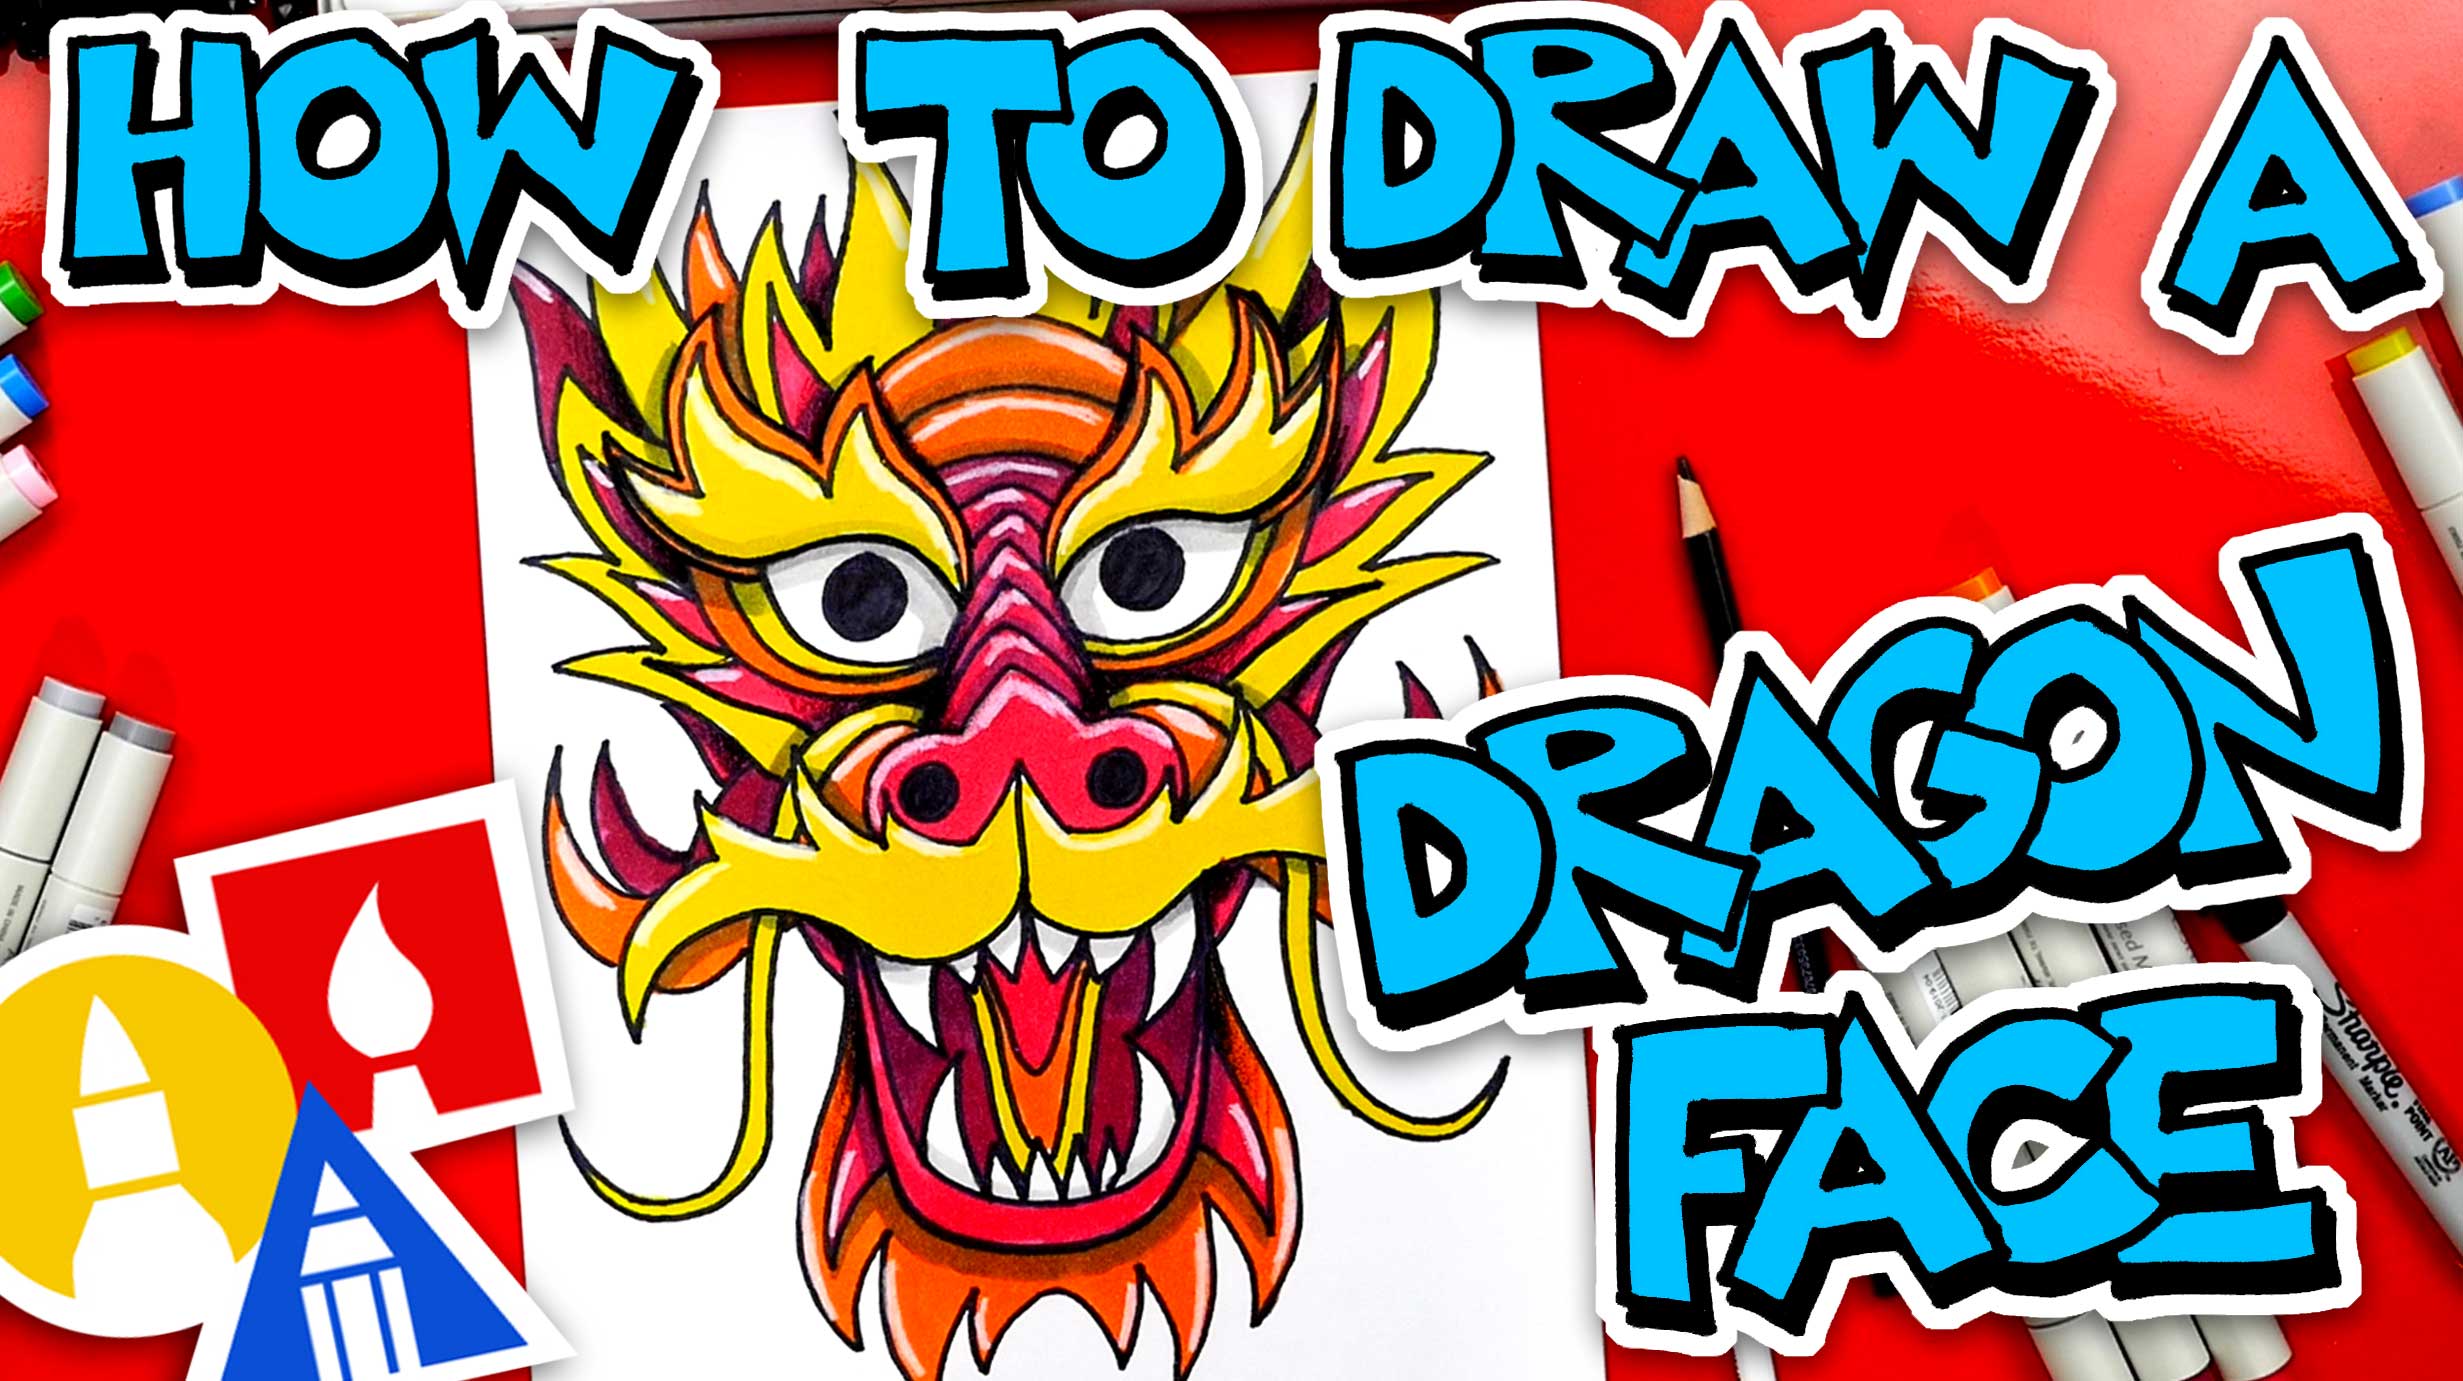 How To Draw A Realistic Dragon For Kids Our how to draw a dragon step